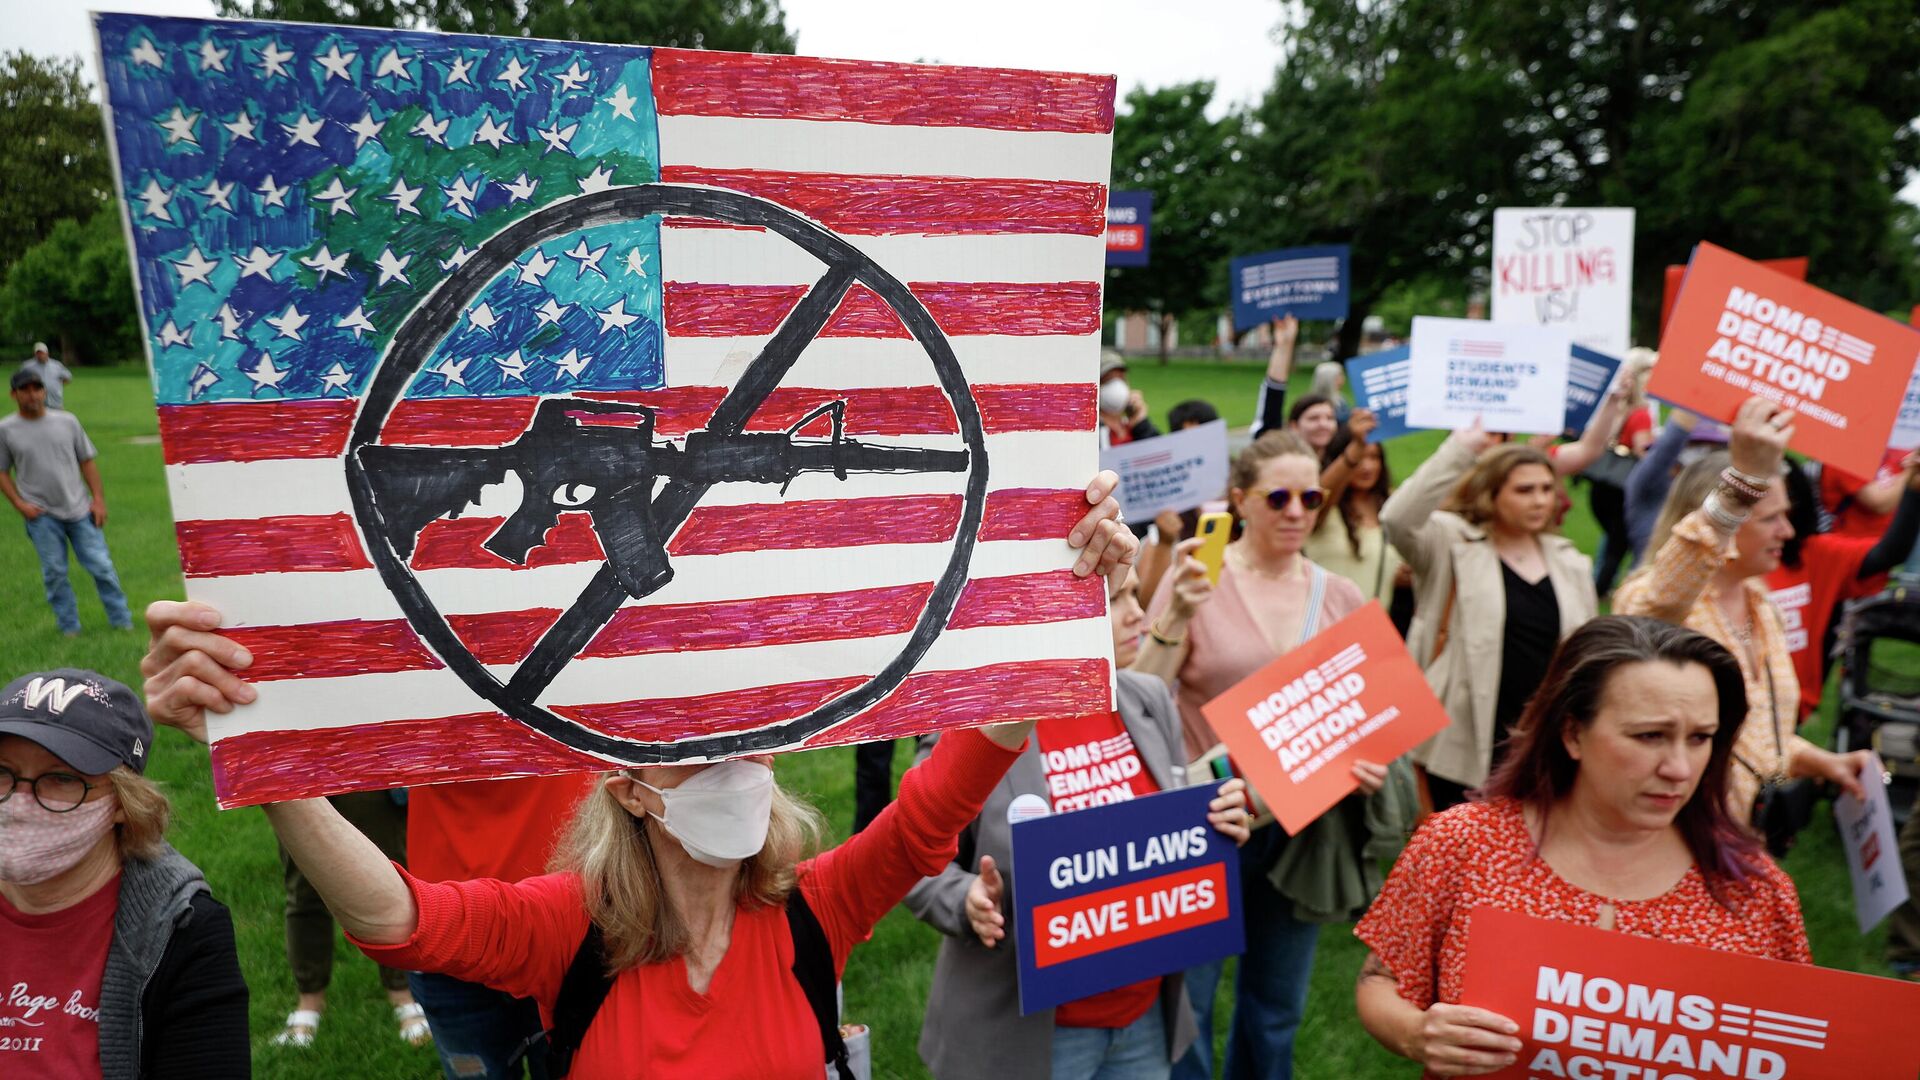 Gun control advocacy groups rally with Democratic members of Congress outside the U.S. Capitol on May 26, 2022 in Washington, DC. - Sputnik International, 1920, 29.05.2022